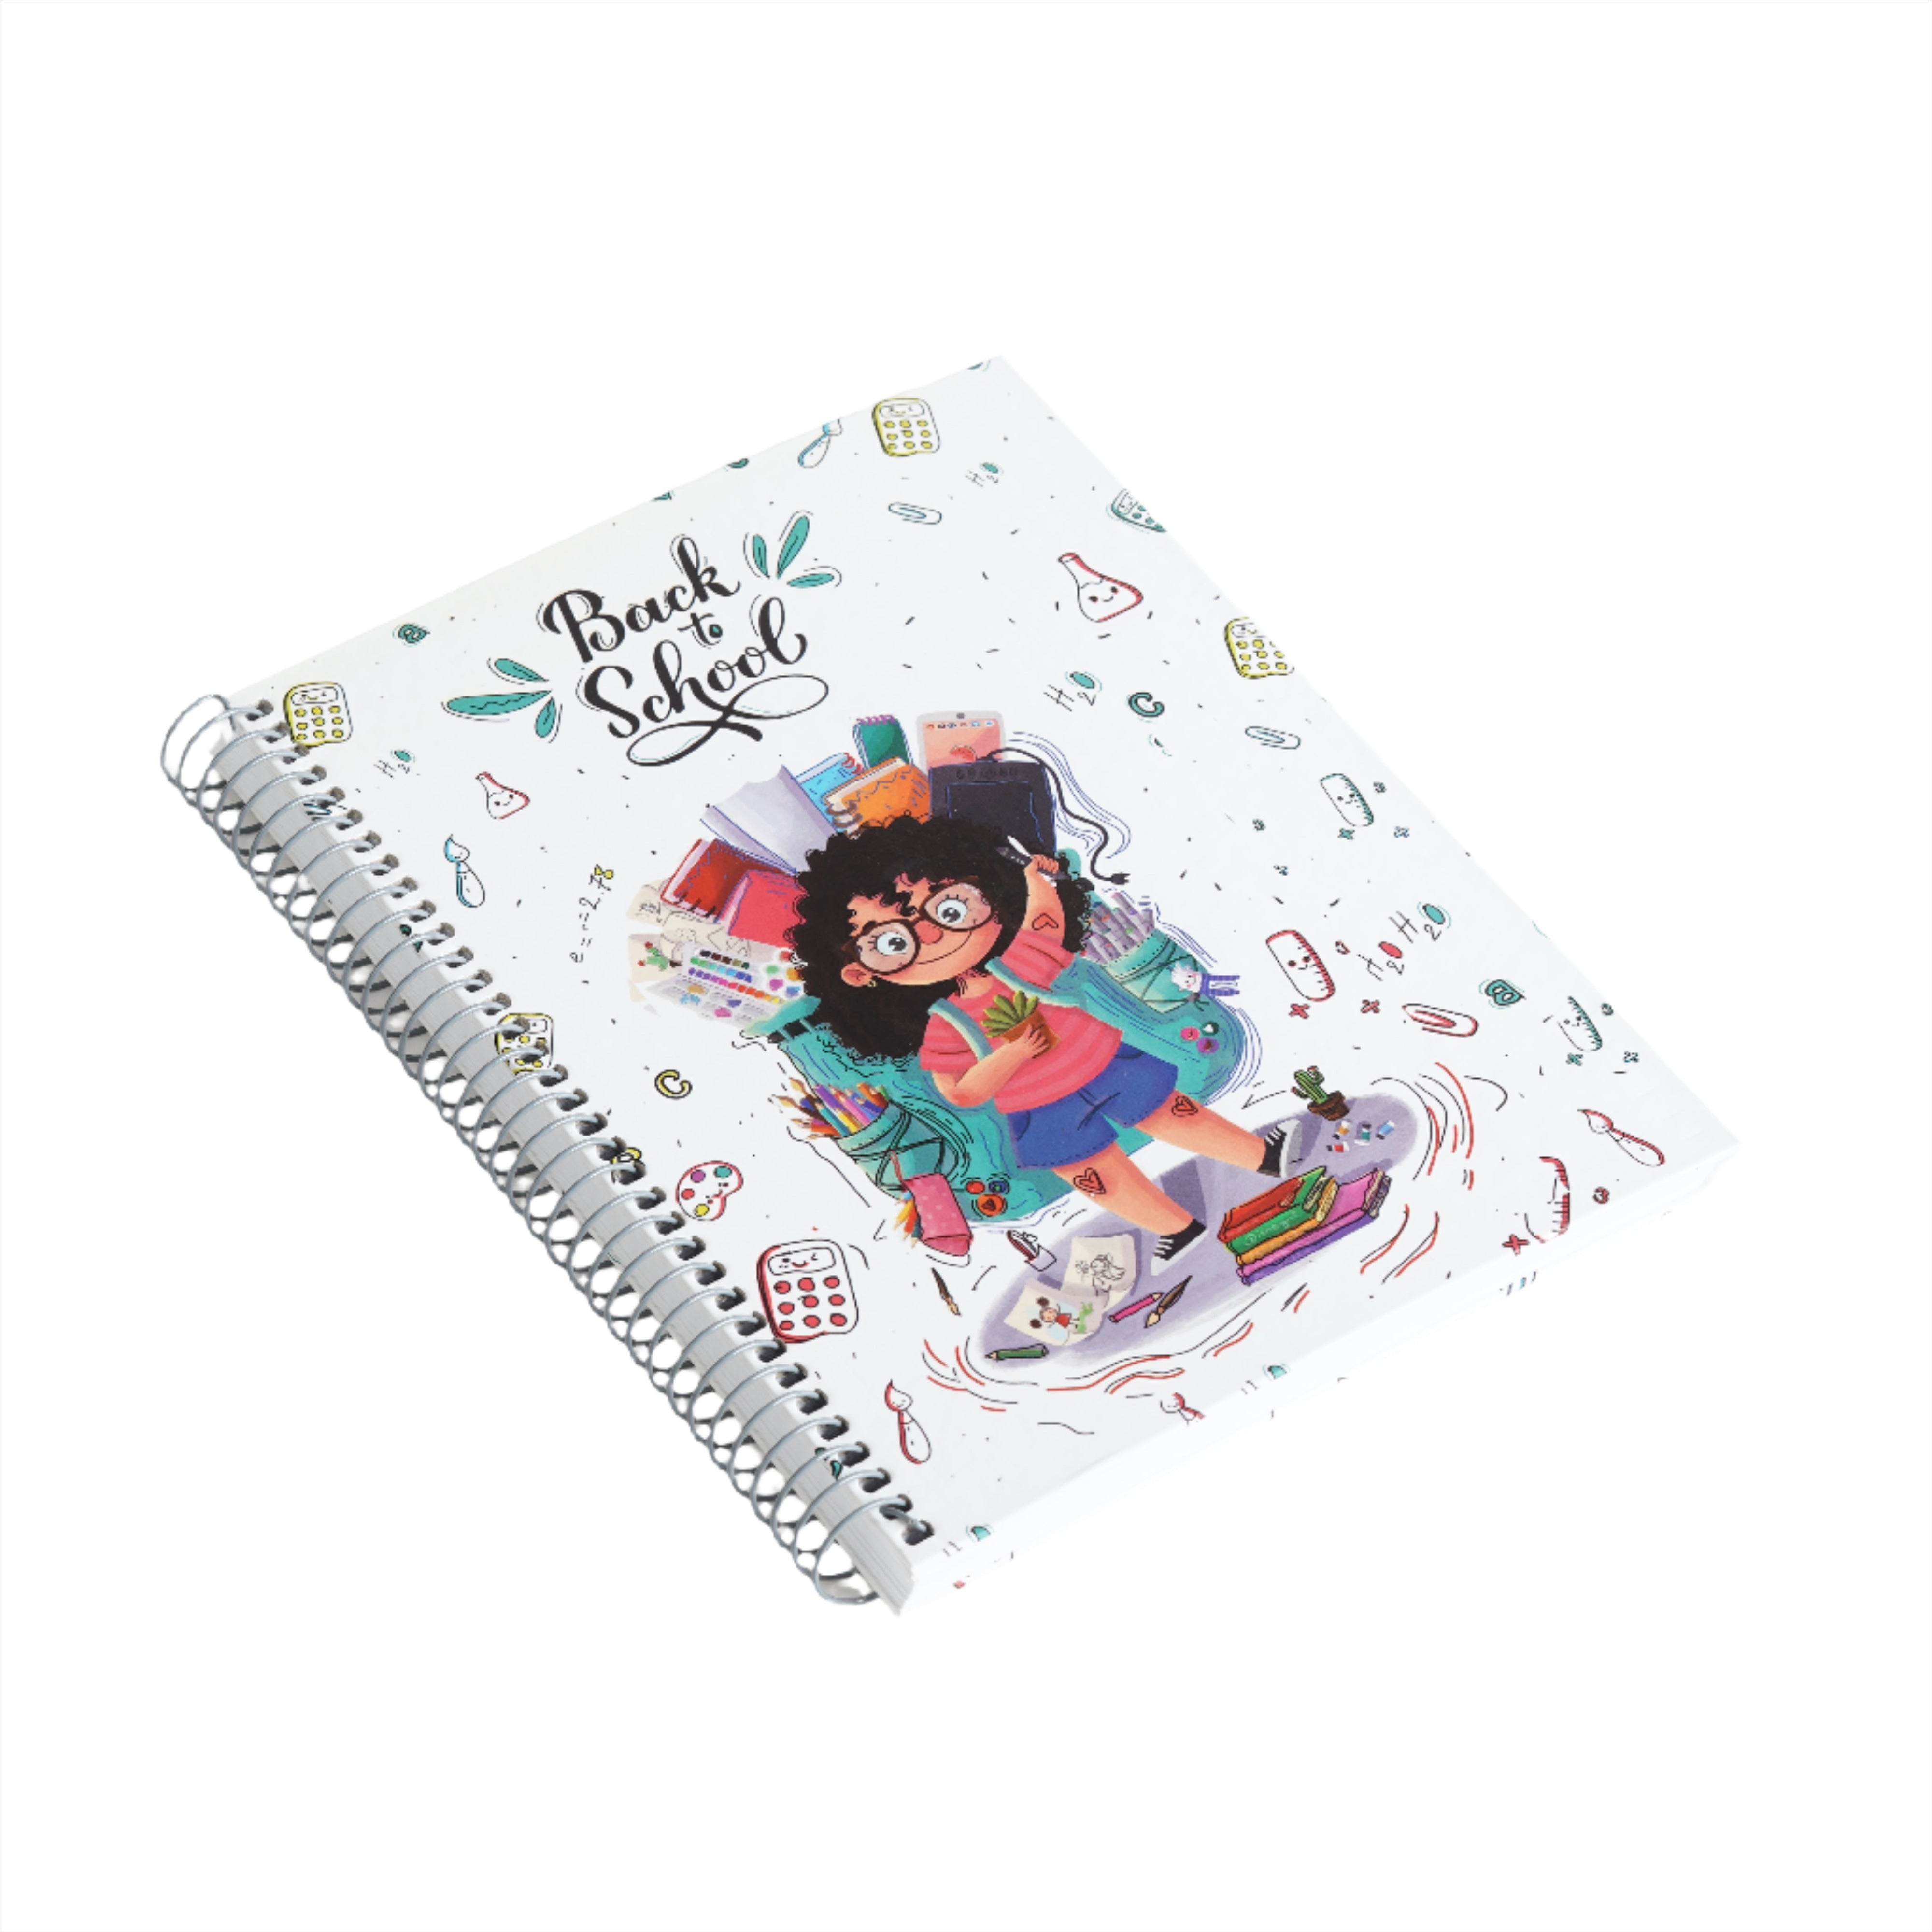 2BE Spiral Notebook A5 200 sheets - Back to school